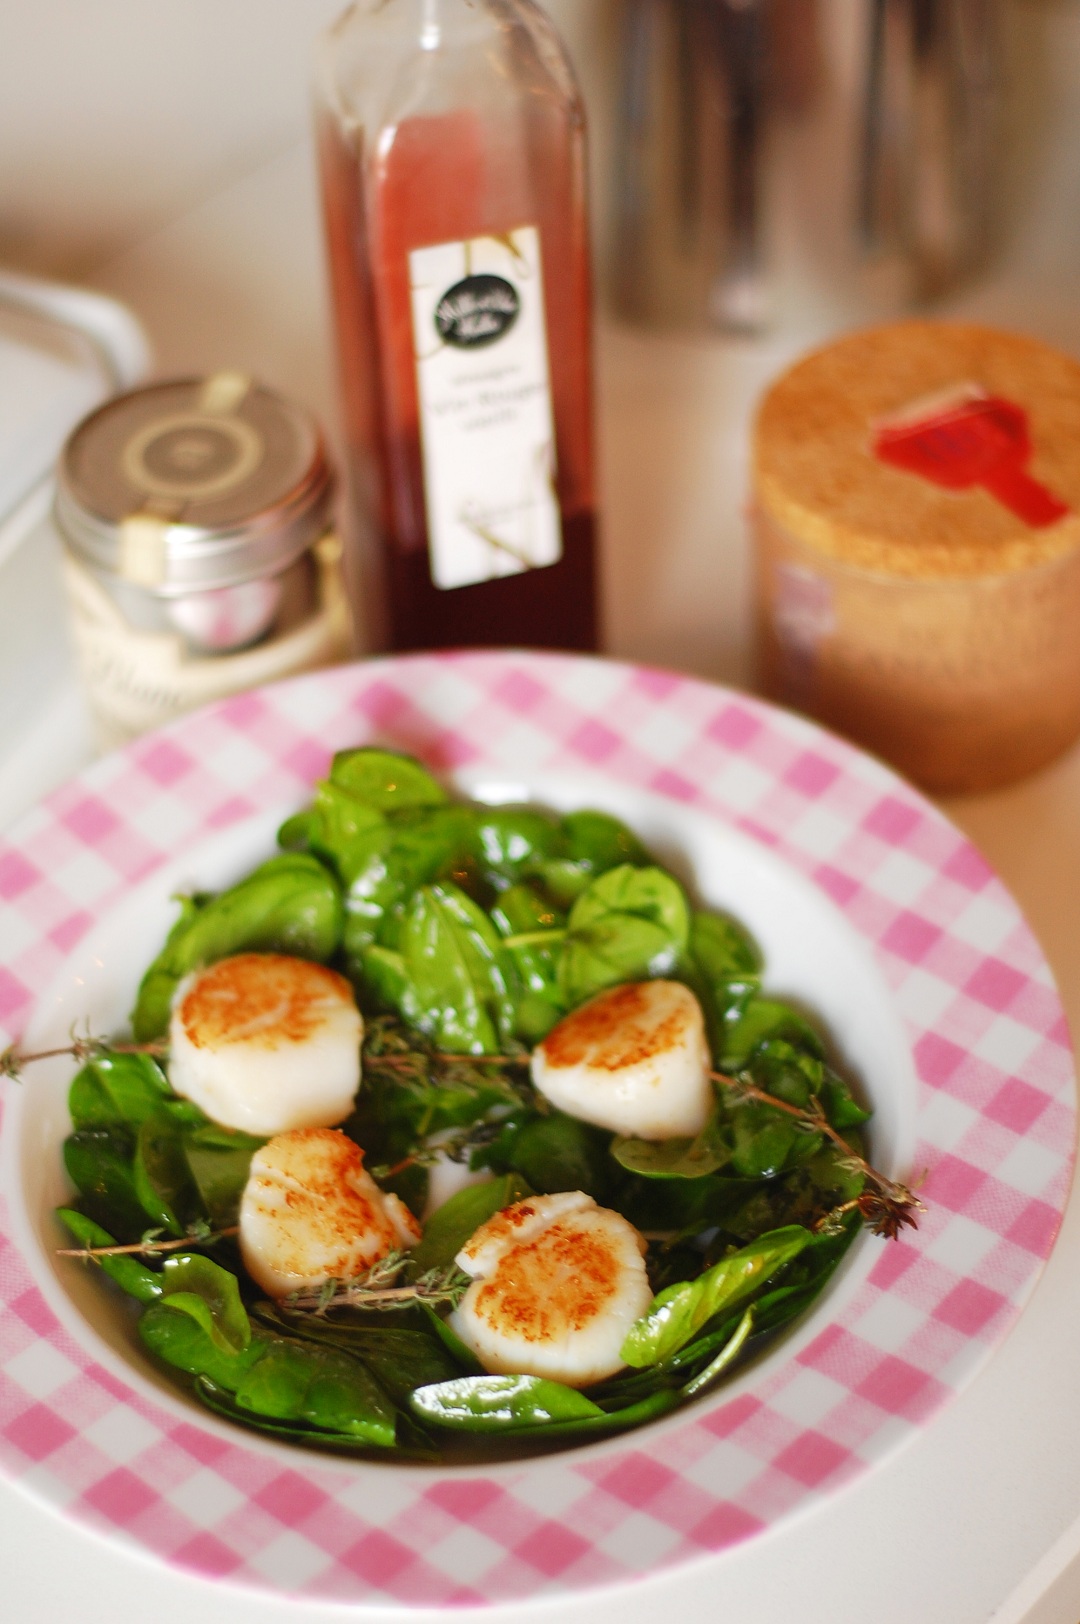 Seared scallops with baby spinach, made at L’atelier Cuisine De Patricia.